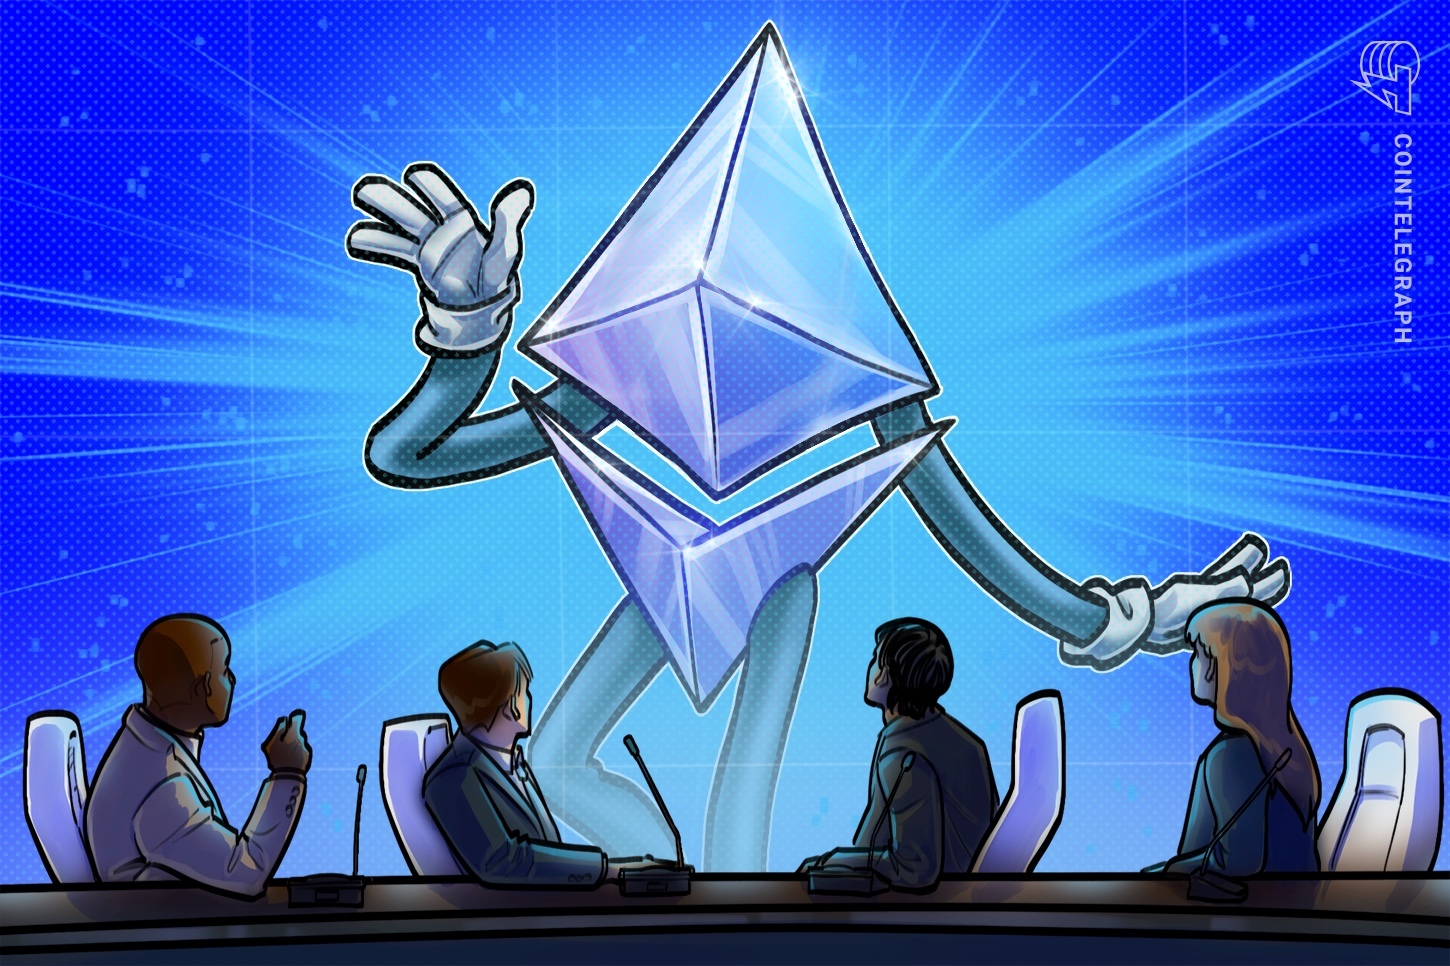 Ethereum derivatives data suggests $1,700 might not remain a resistance level for long 